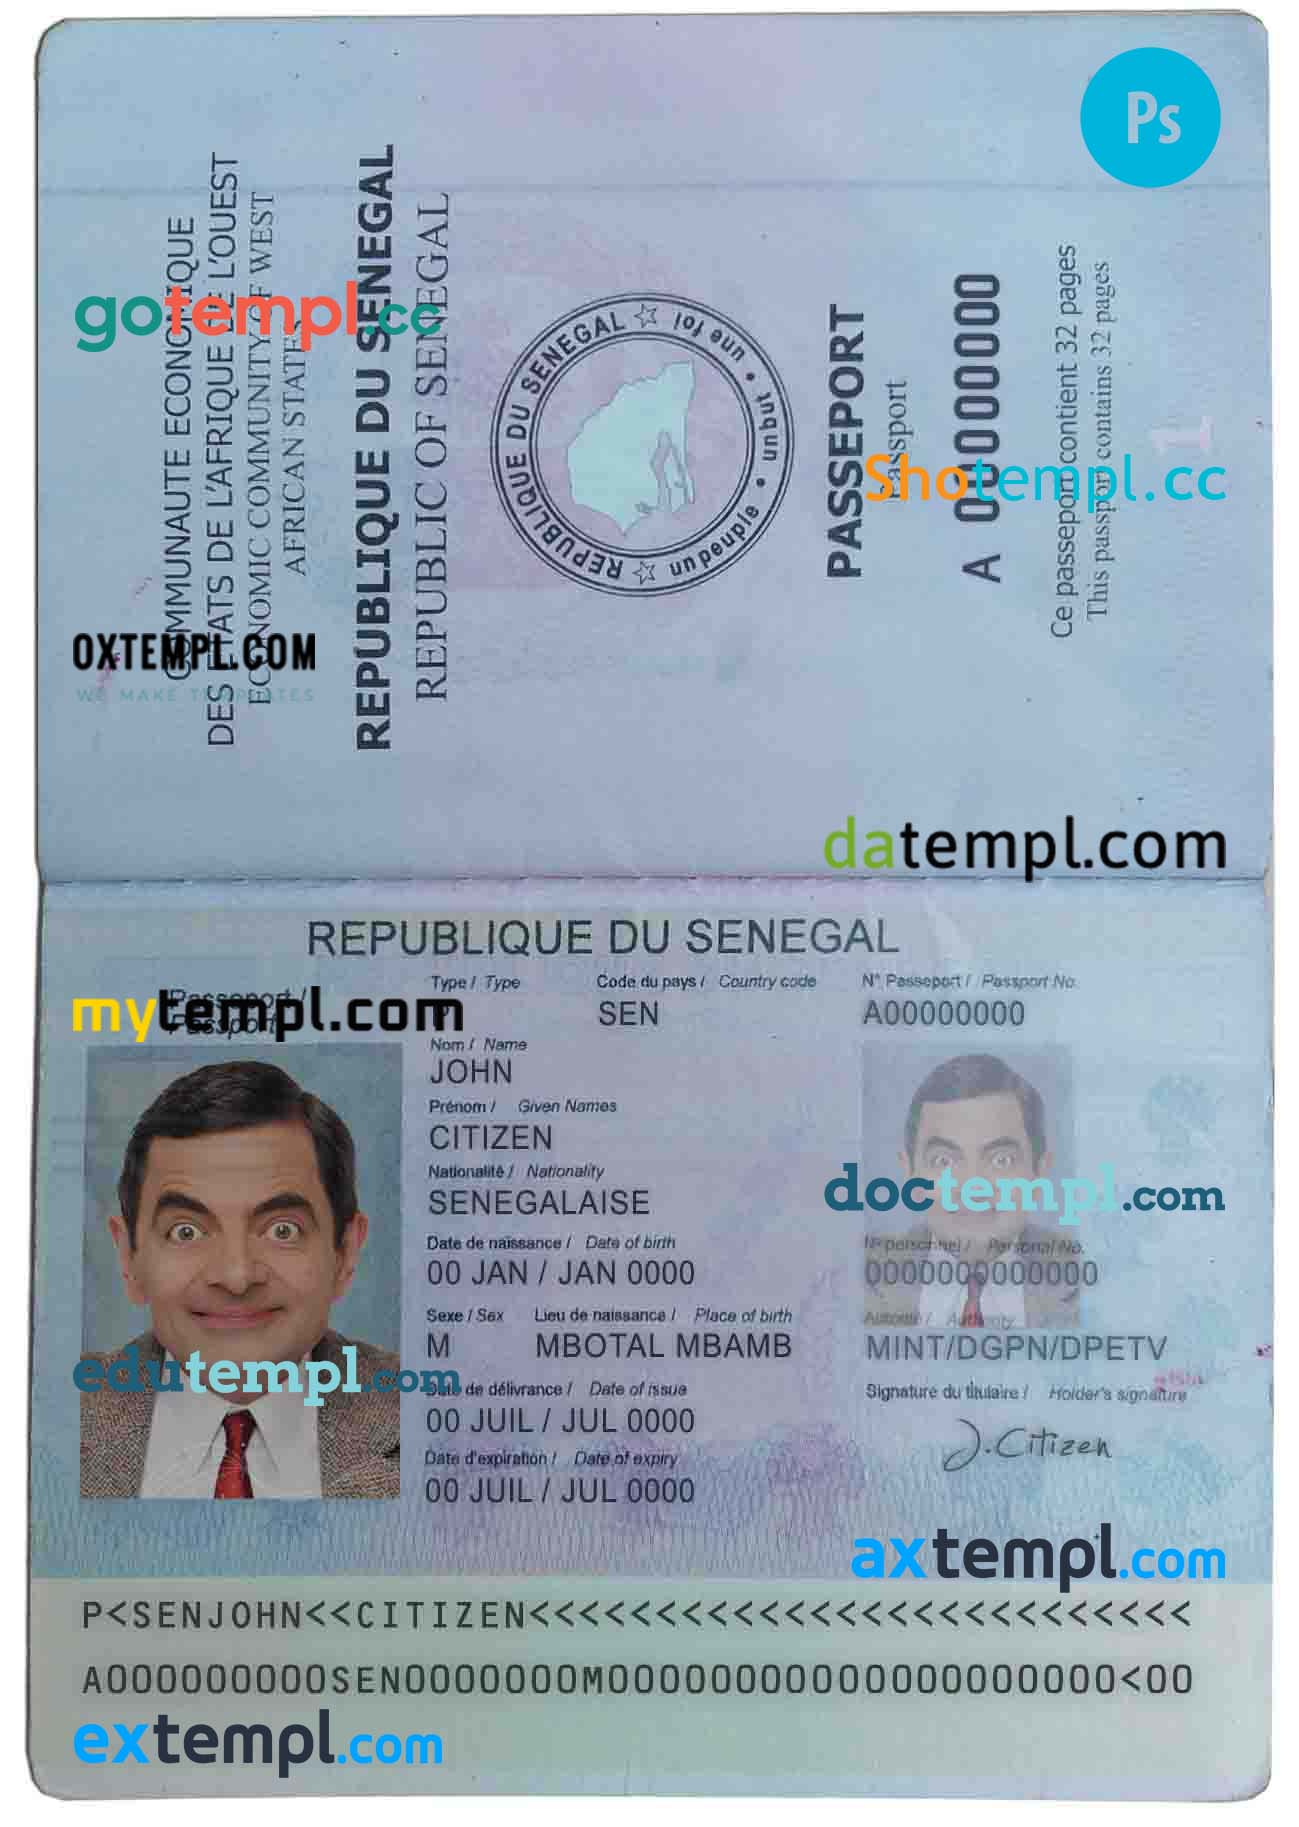 Senegal passport PSD files, editable scan and photo-realistic look sample, 2 in 1